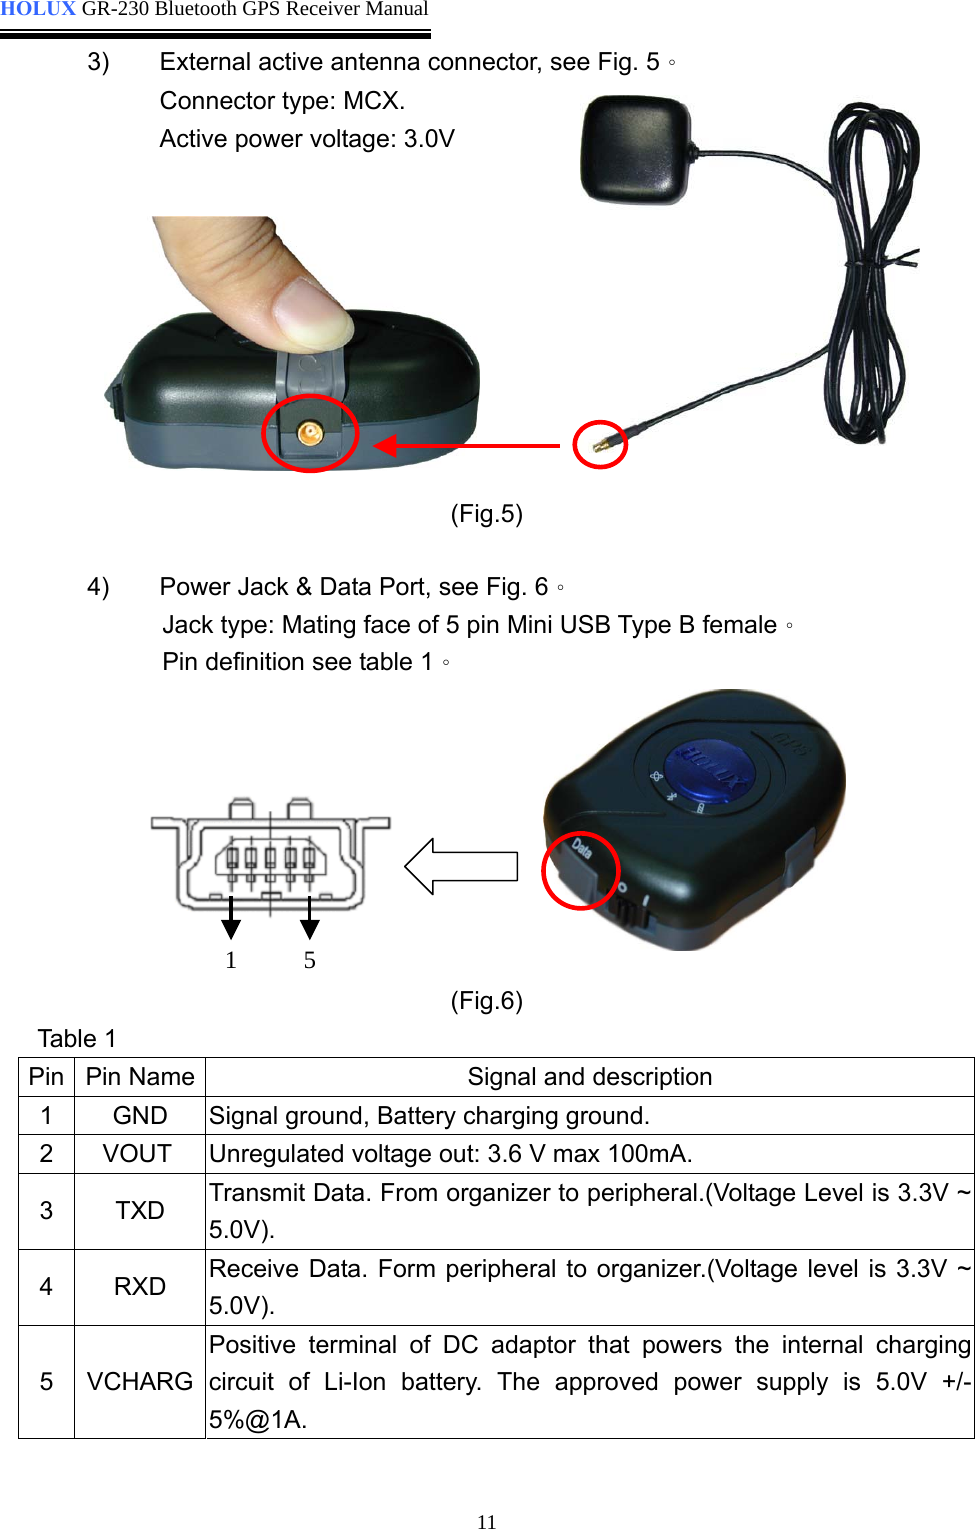  HOLUX GR-230 Bluetooth GPS Receiver Manual   113)   connector,Active power voltage: 3.0V  (Fig.5) 4) in Mini USB Type B female。 Pin definition see table 1。  (Fig.6) lPin  Pin Name  tion External active antenna  see Fig. 5。 Connector type: MCX.          Power Jack &amp; Data Port, see Fig. 6。 Jack type: Mating face of 5 p        Tab e 1 Signal and descrip1  GND  Signal ground, Battery charging ground. 2  VOUT  Unregulated voltage out: 3.6 V max 100mA. 3 TXD  it Data. From organizer to peripheral.(Voltage Level is 3.3V ~ Transm5.0V). 4 RXD  e Data. Form peripheral to organizer.(Voltage level is 3.3V ~ Receiv5.0V).  5  VCHARG  Li-Ion battery. The approved power supply is 5.0V +/-5%@1A.  Positive terminal of DC adaptor that powers the internal charging circuit of    1   5 